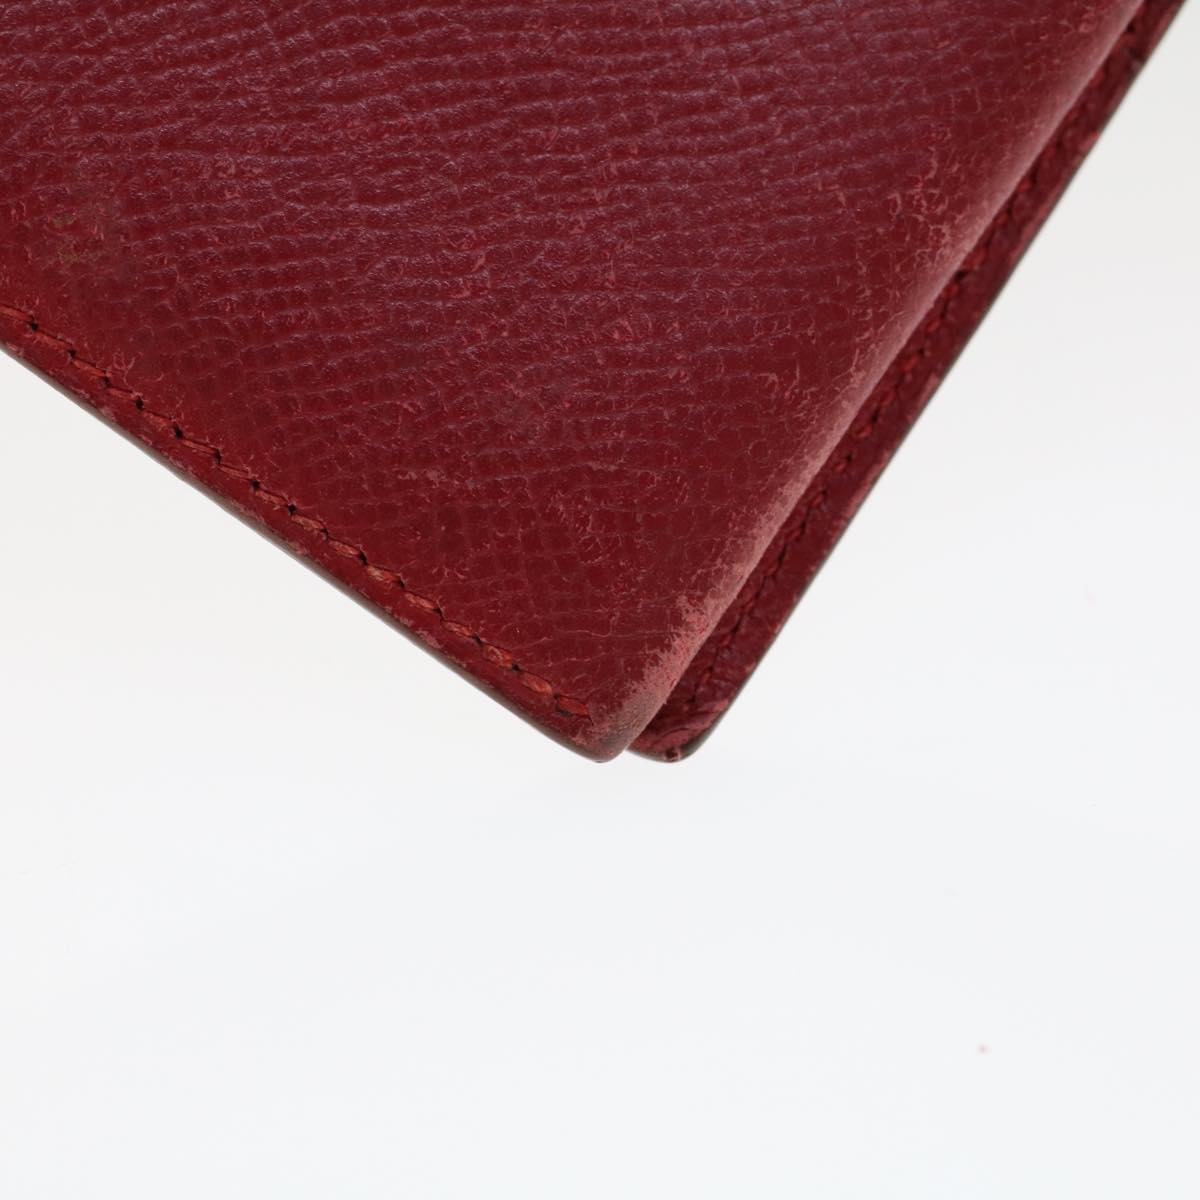 HERMES Bean Wallet Leather Red Auth yb127